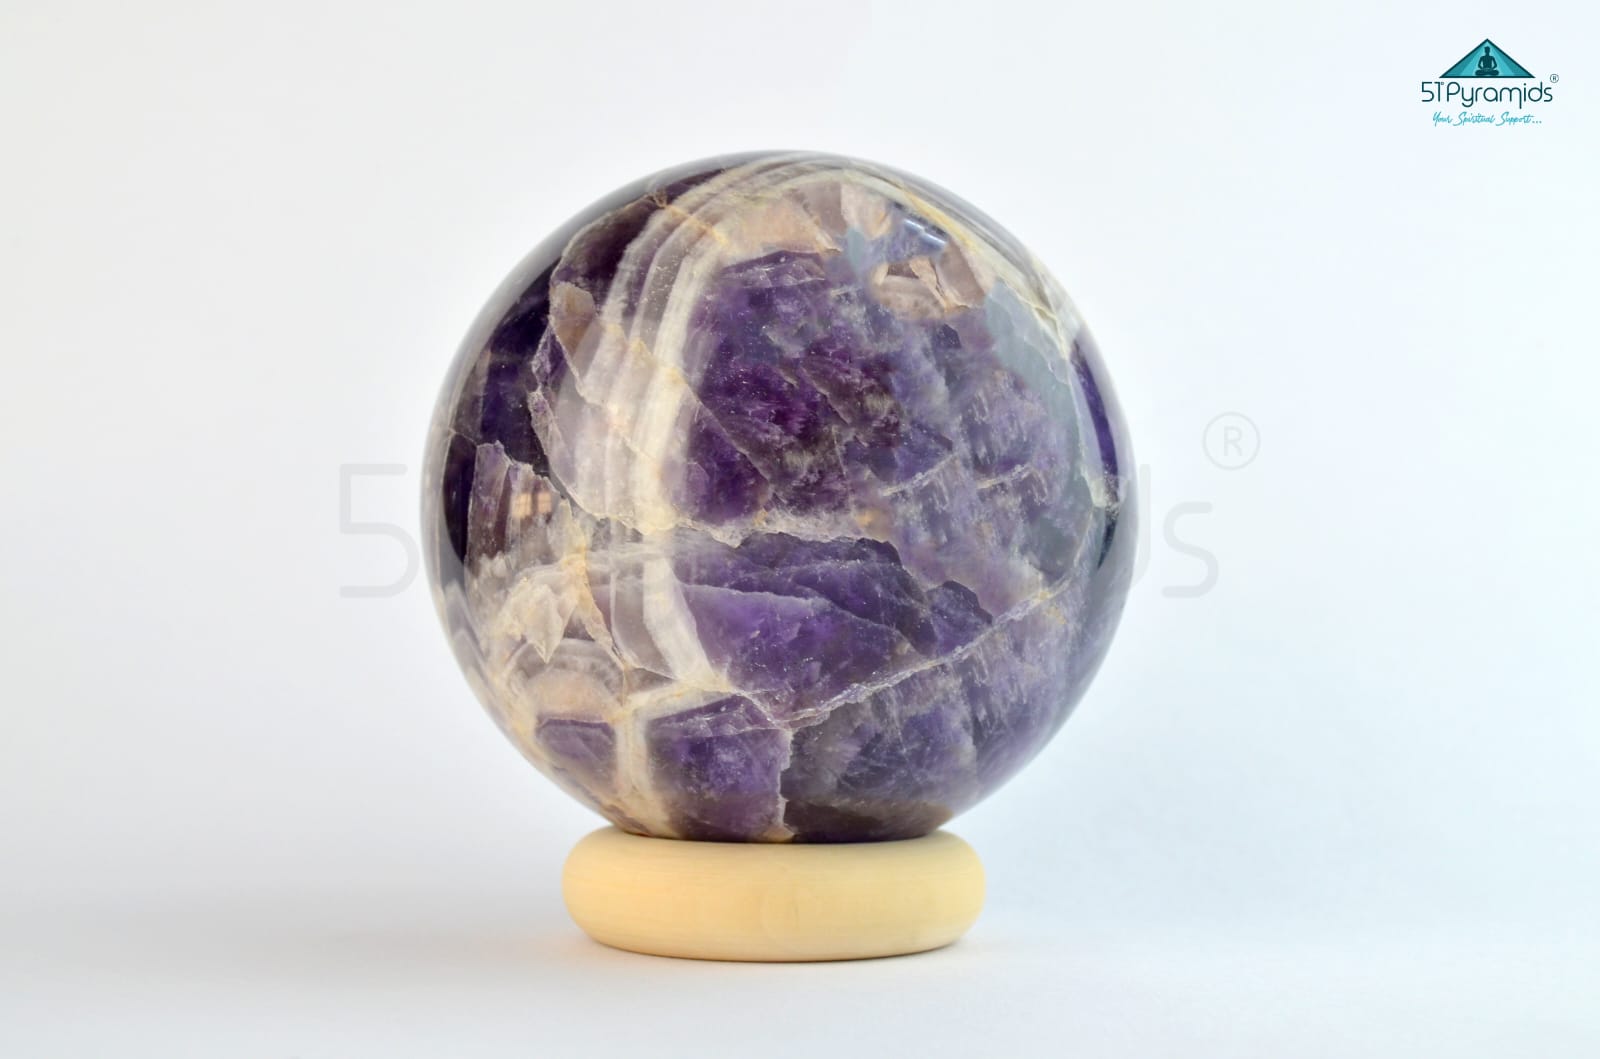 Enhance Your Space & Meditation with a Large Amethyst Crystal Sphere